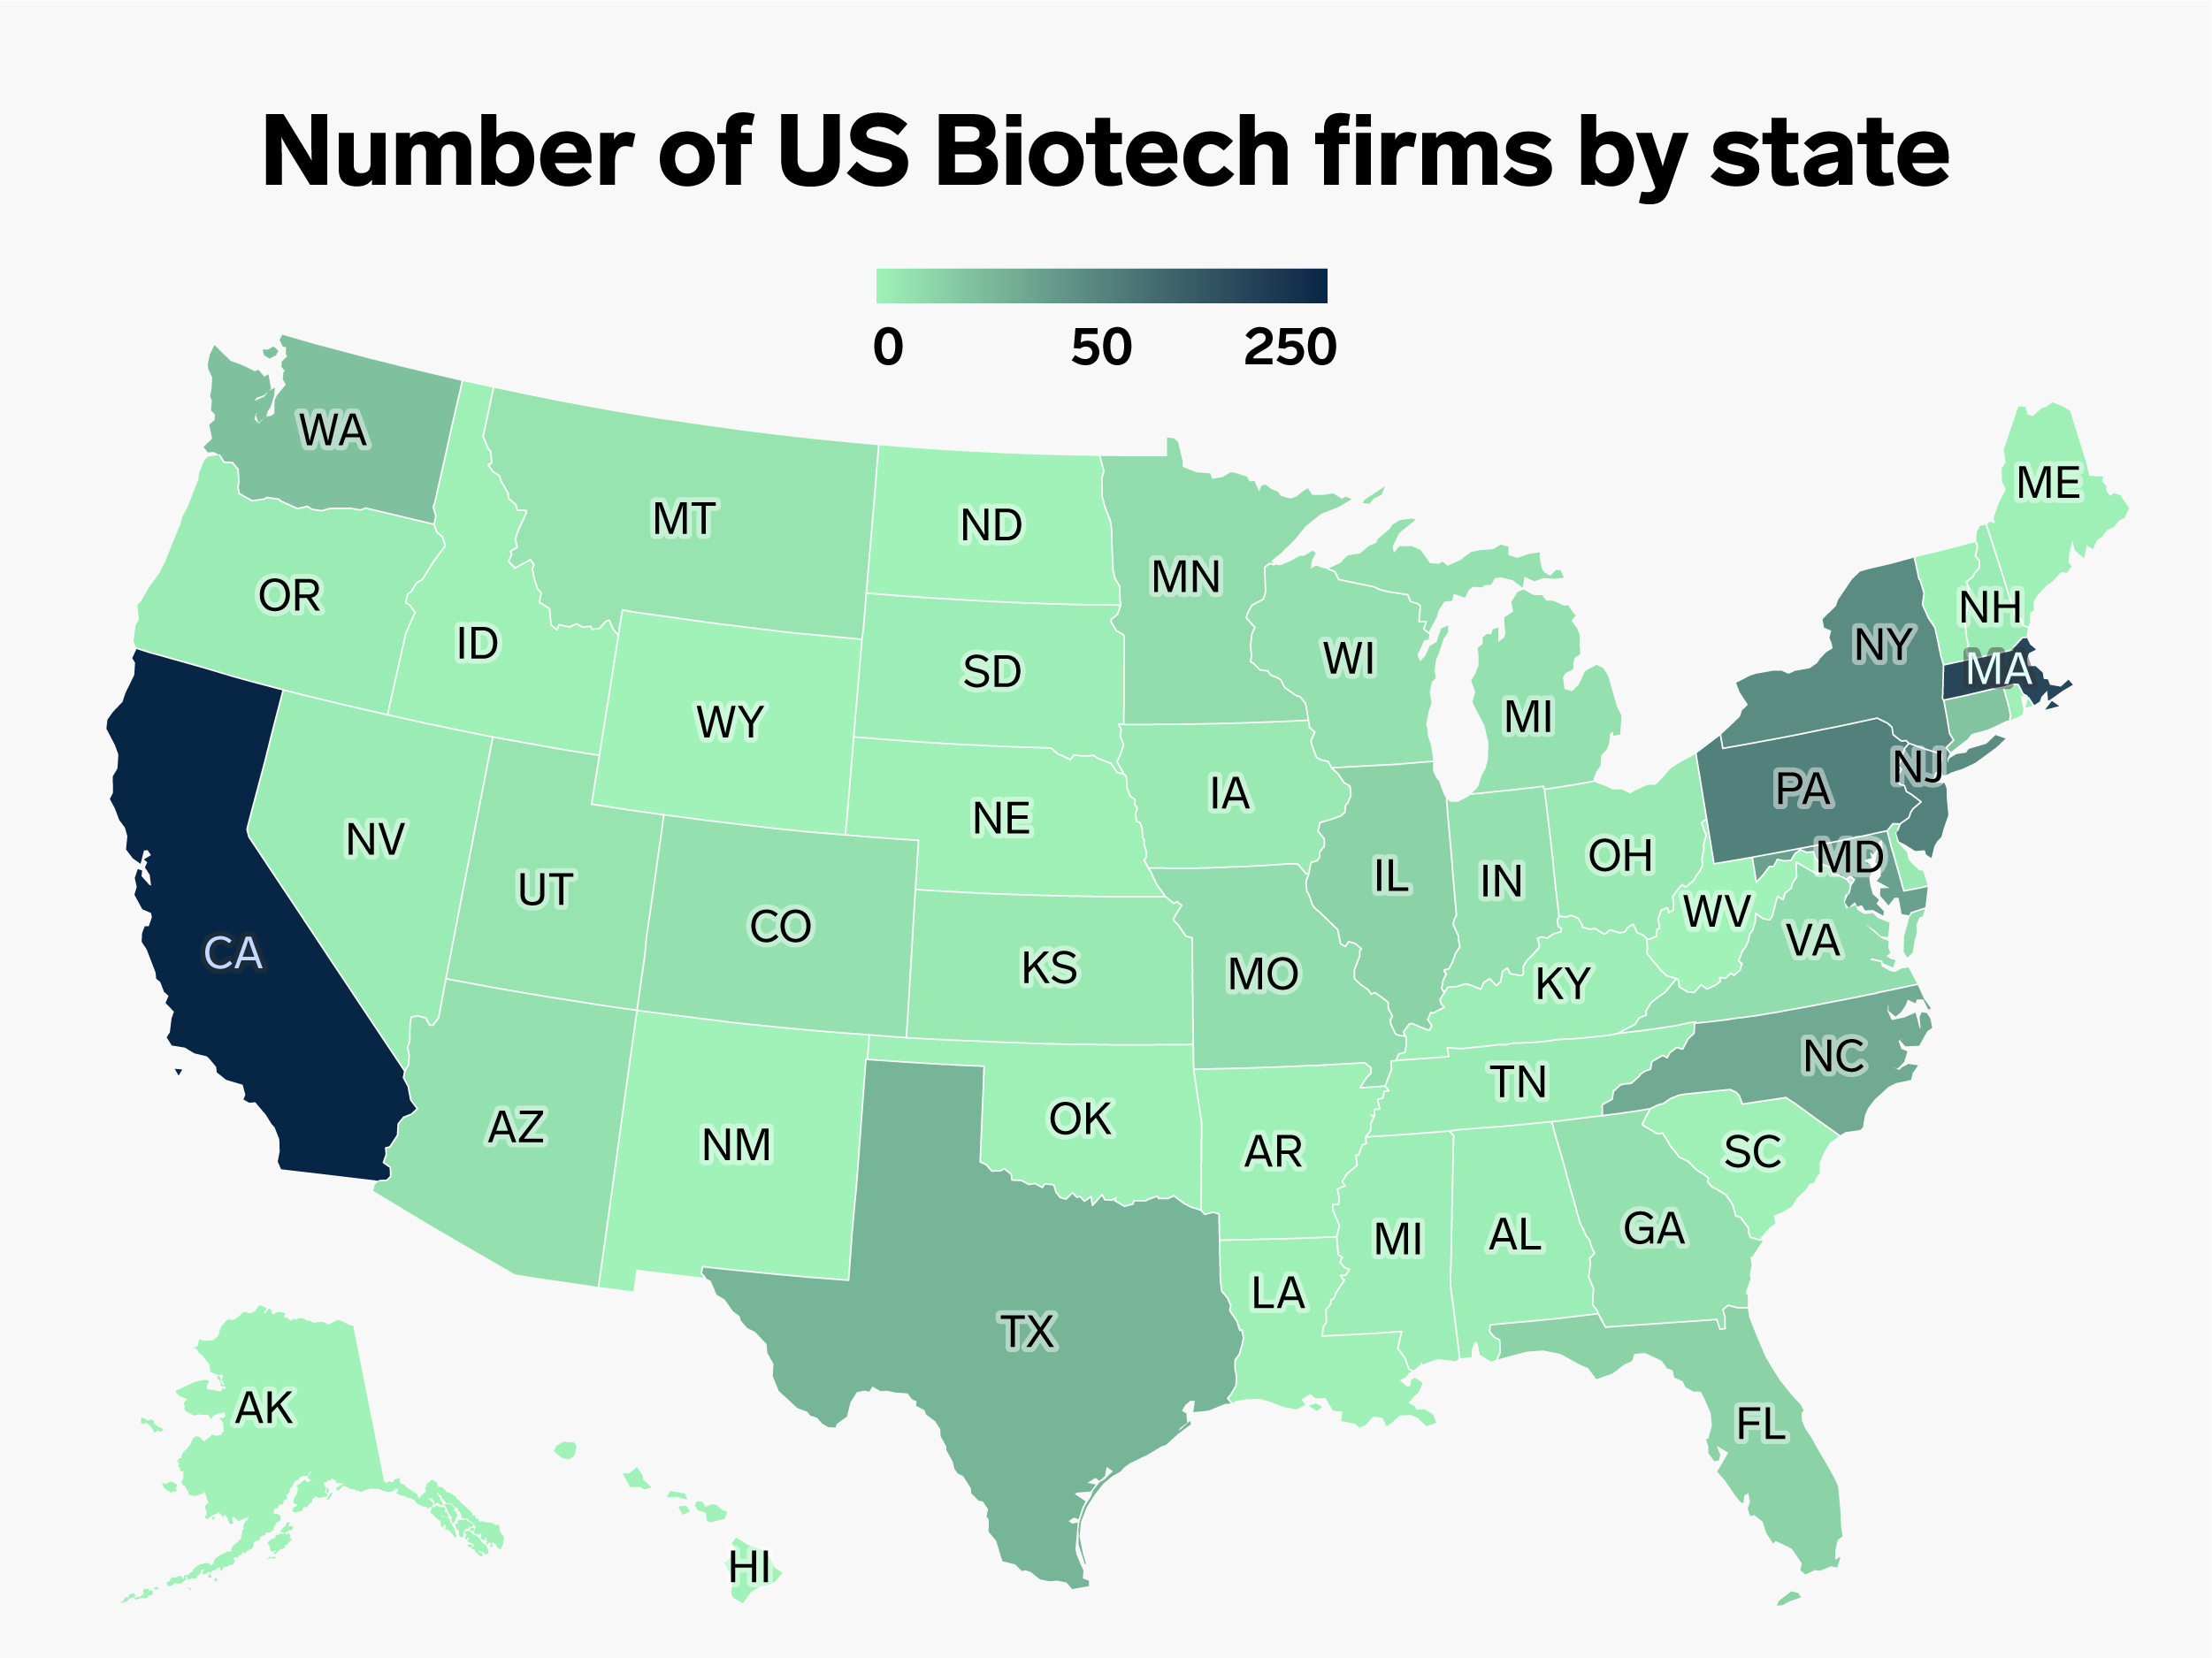 A US map showing the number of Biotech firms in each state.